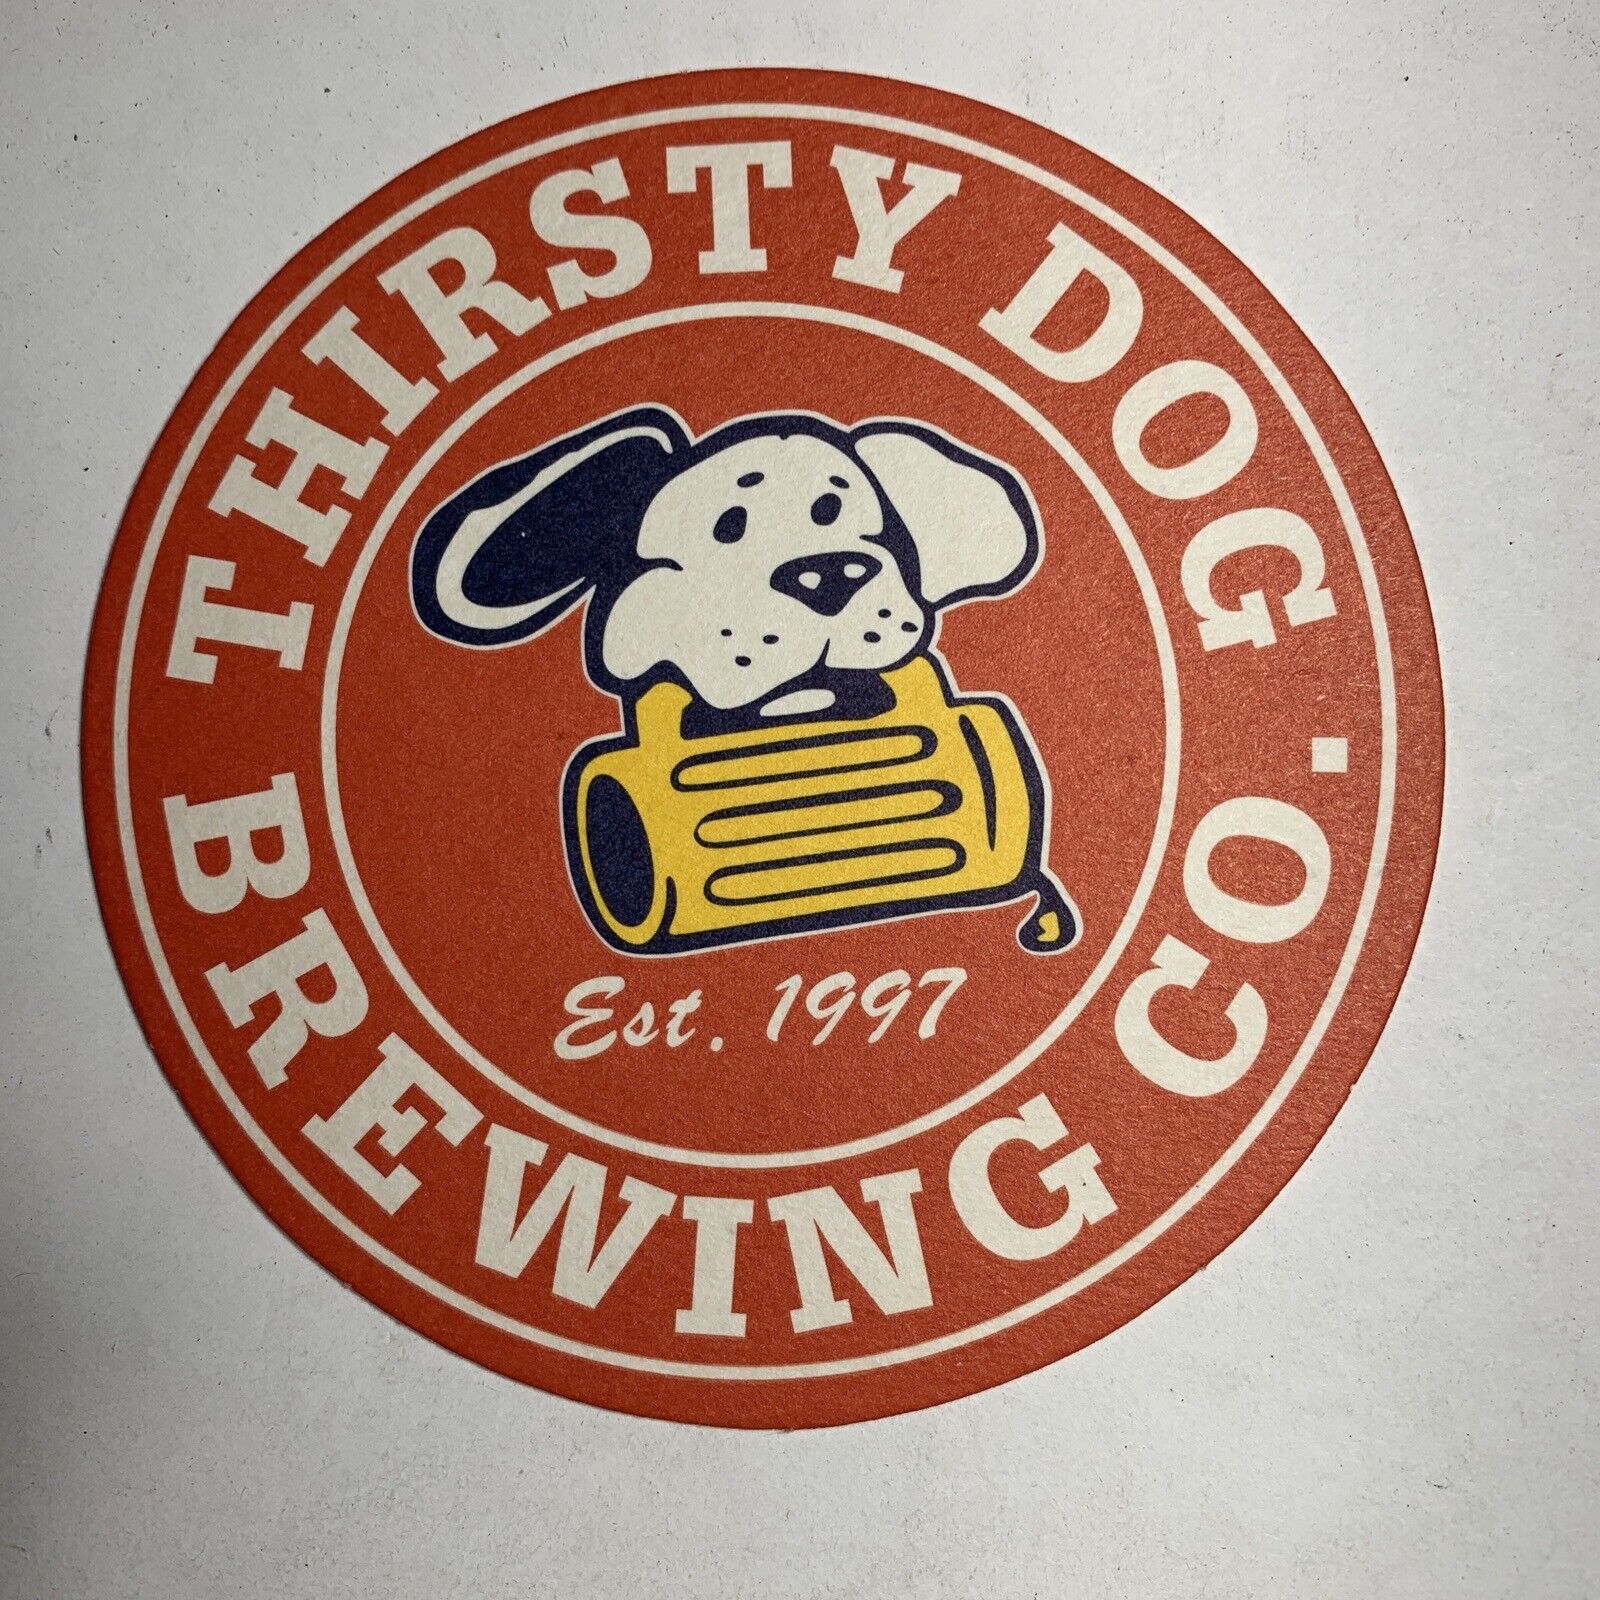 Craft Beer Coaster thirsty dog brewing Company, in Ohio